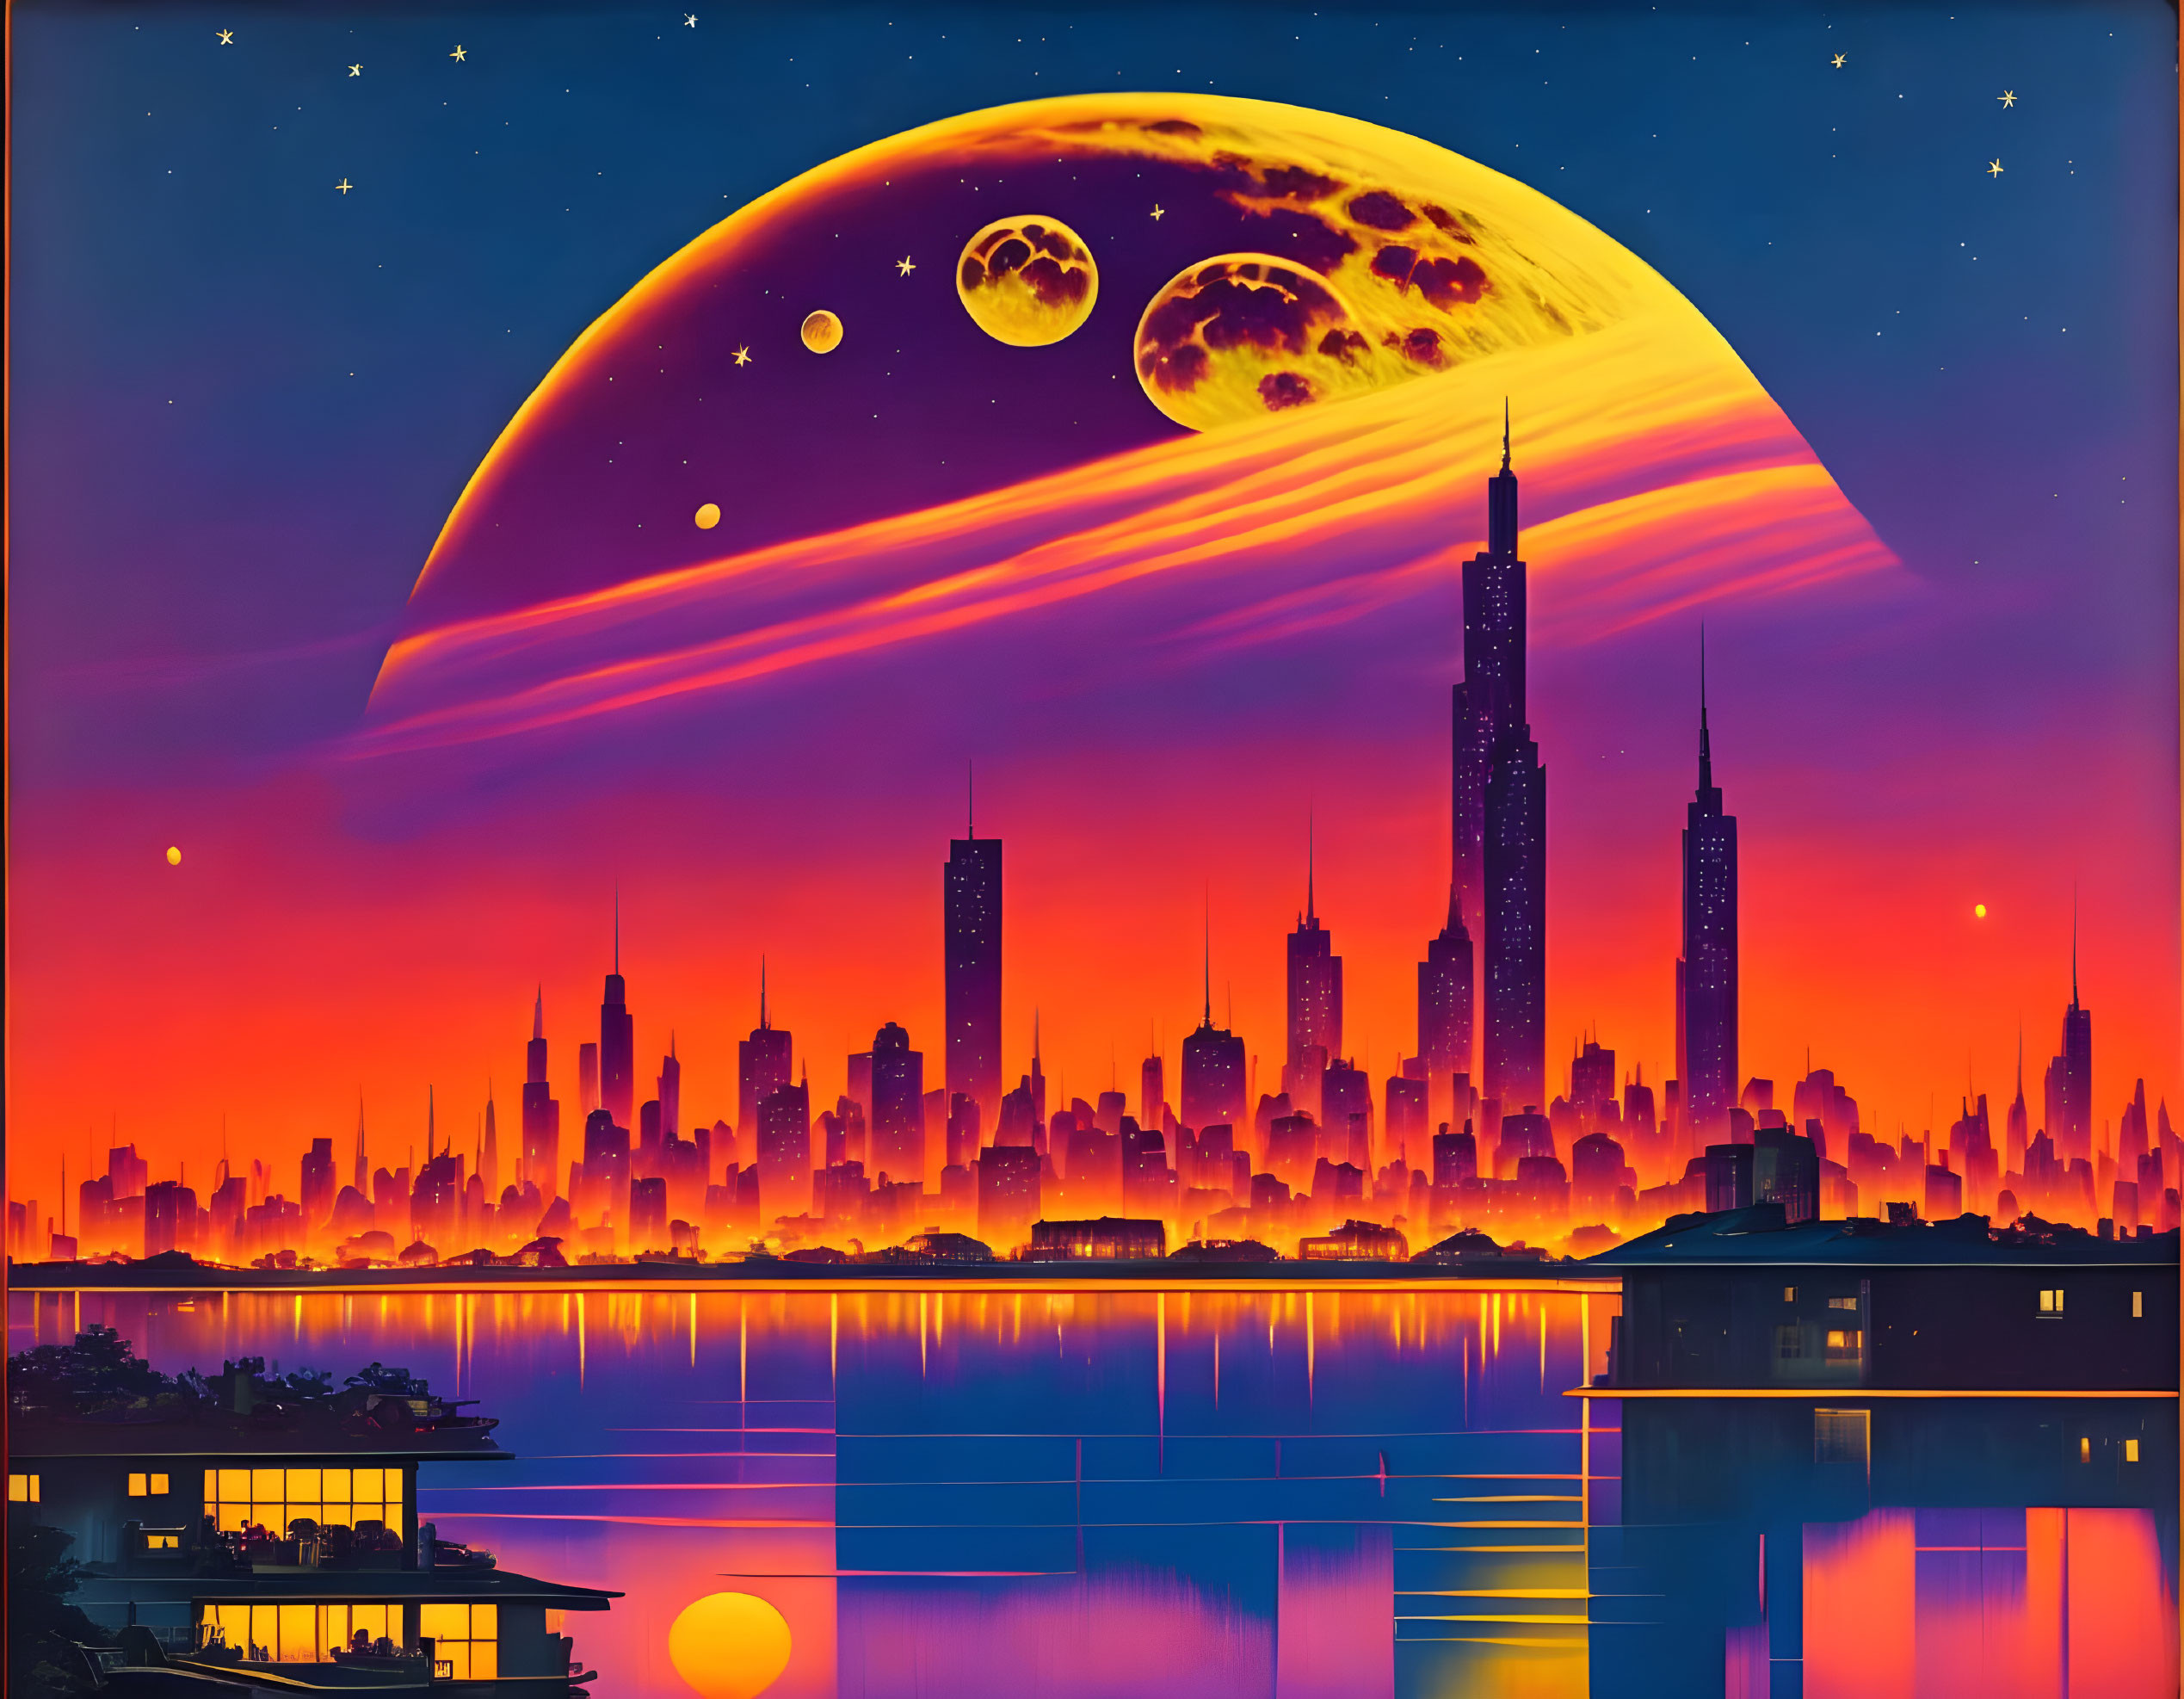 Futuristic city skyline at sunset with celestial bodies reflecting on water